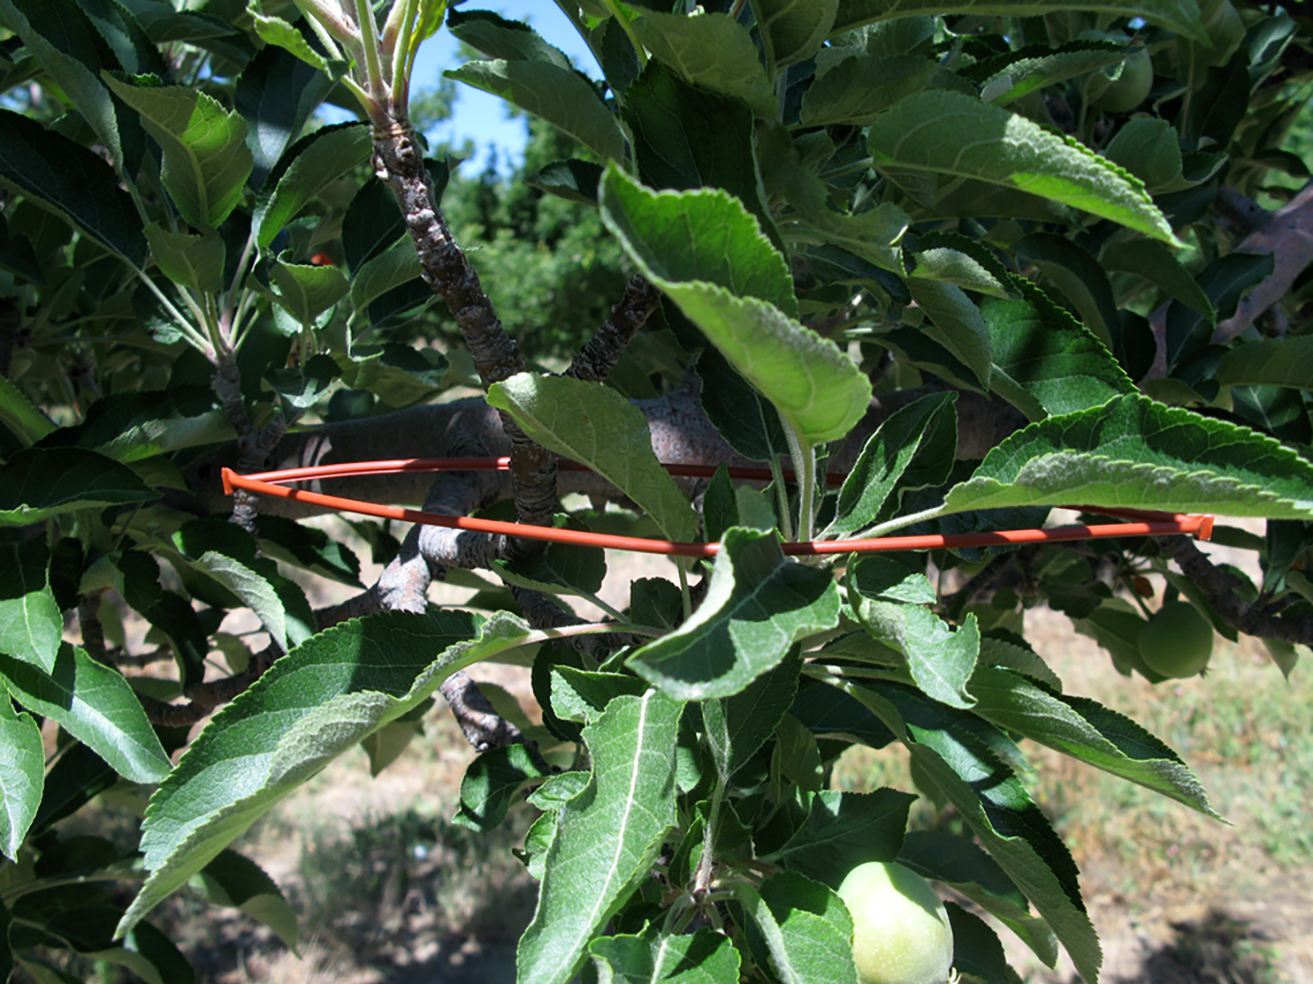 Isomate-PTB TT (Pacific Biocontrol) is formed of “twin tubes” (TT) that contain the pheromone. The dispenser is looped over branches. 